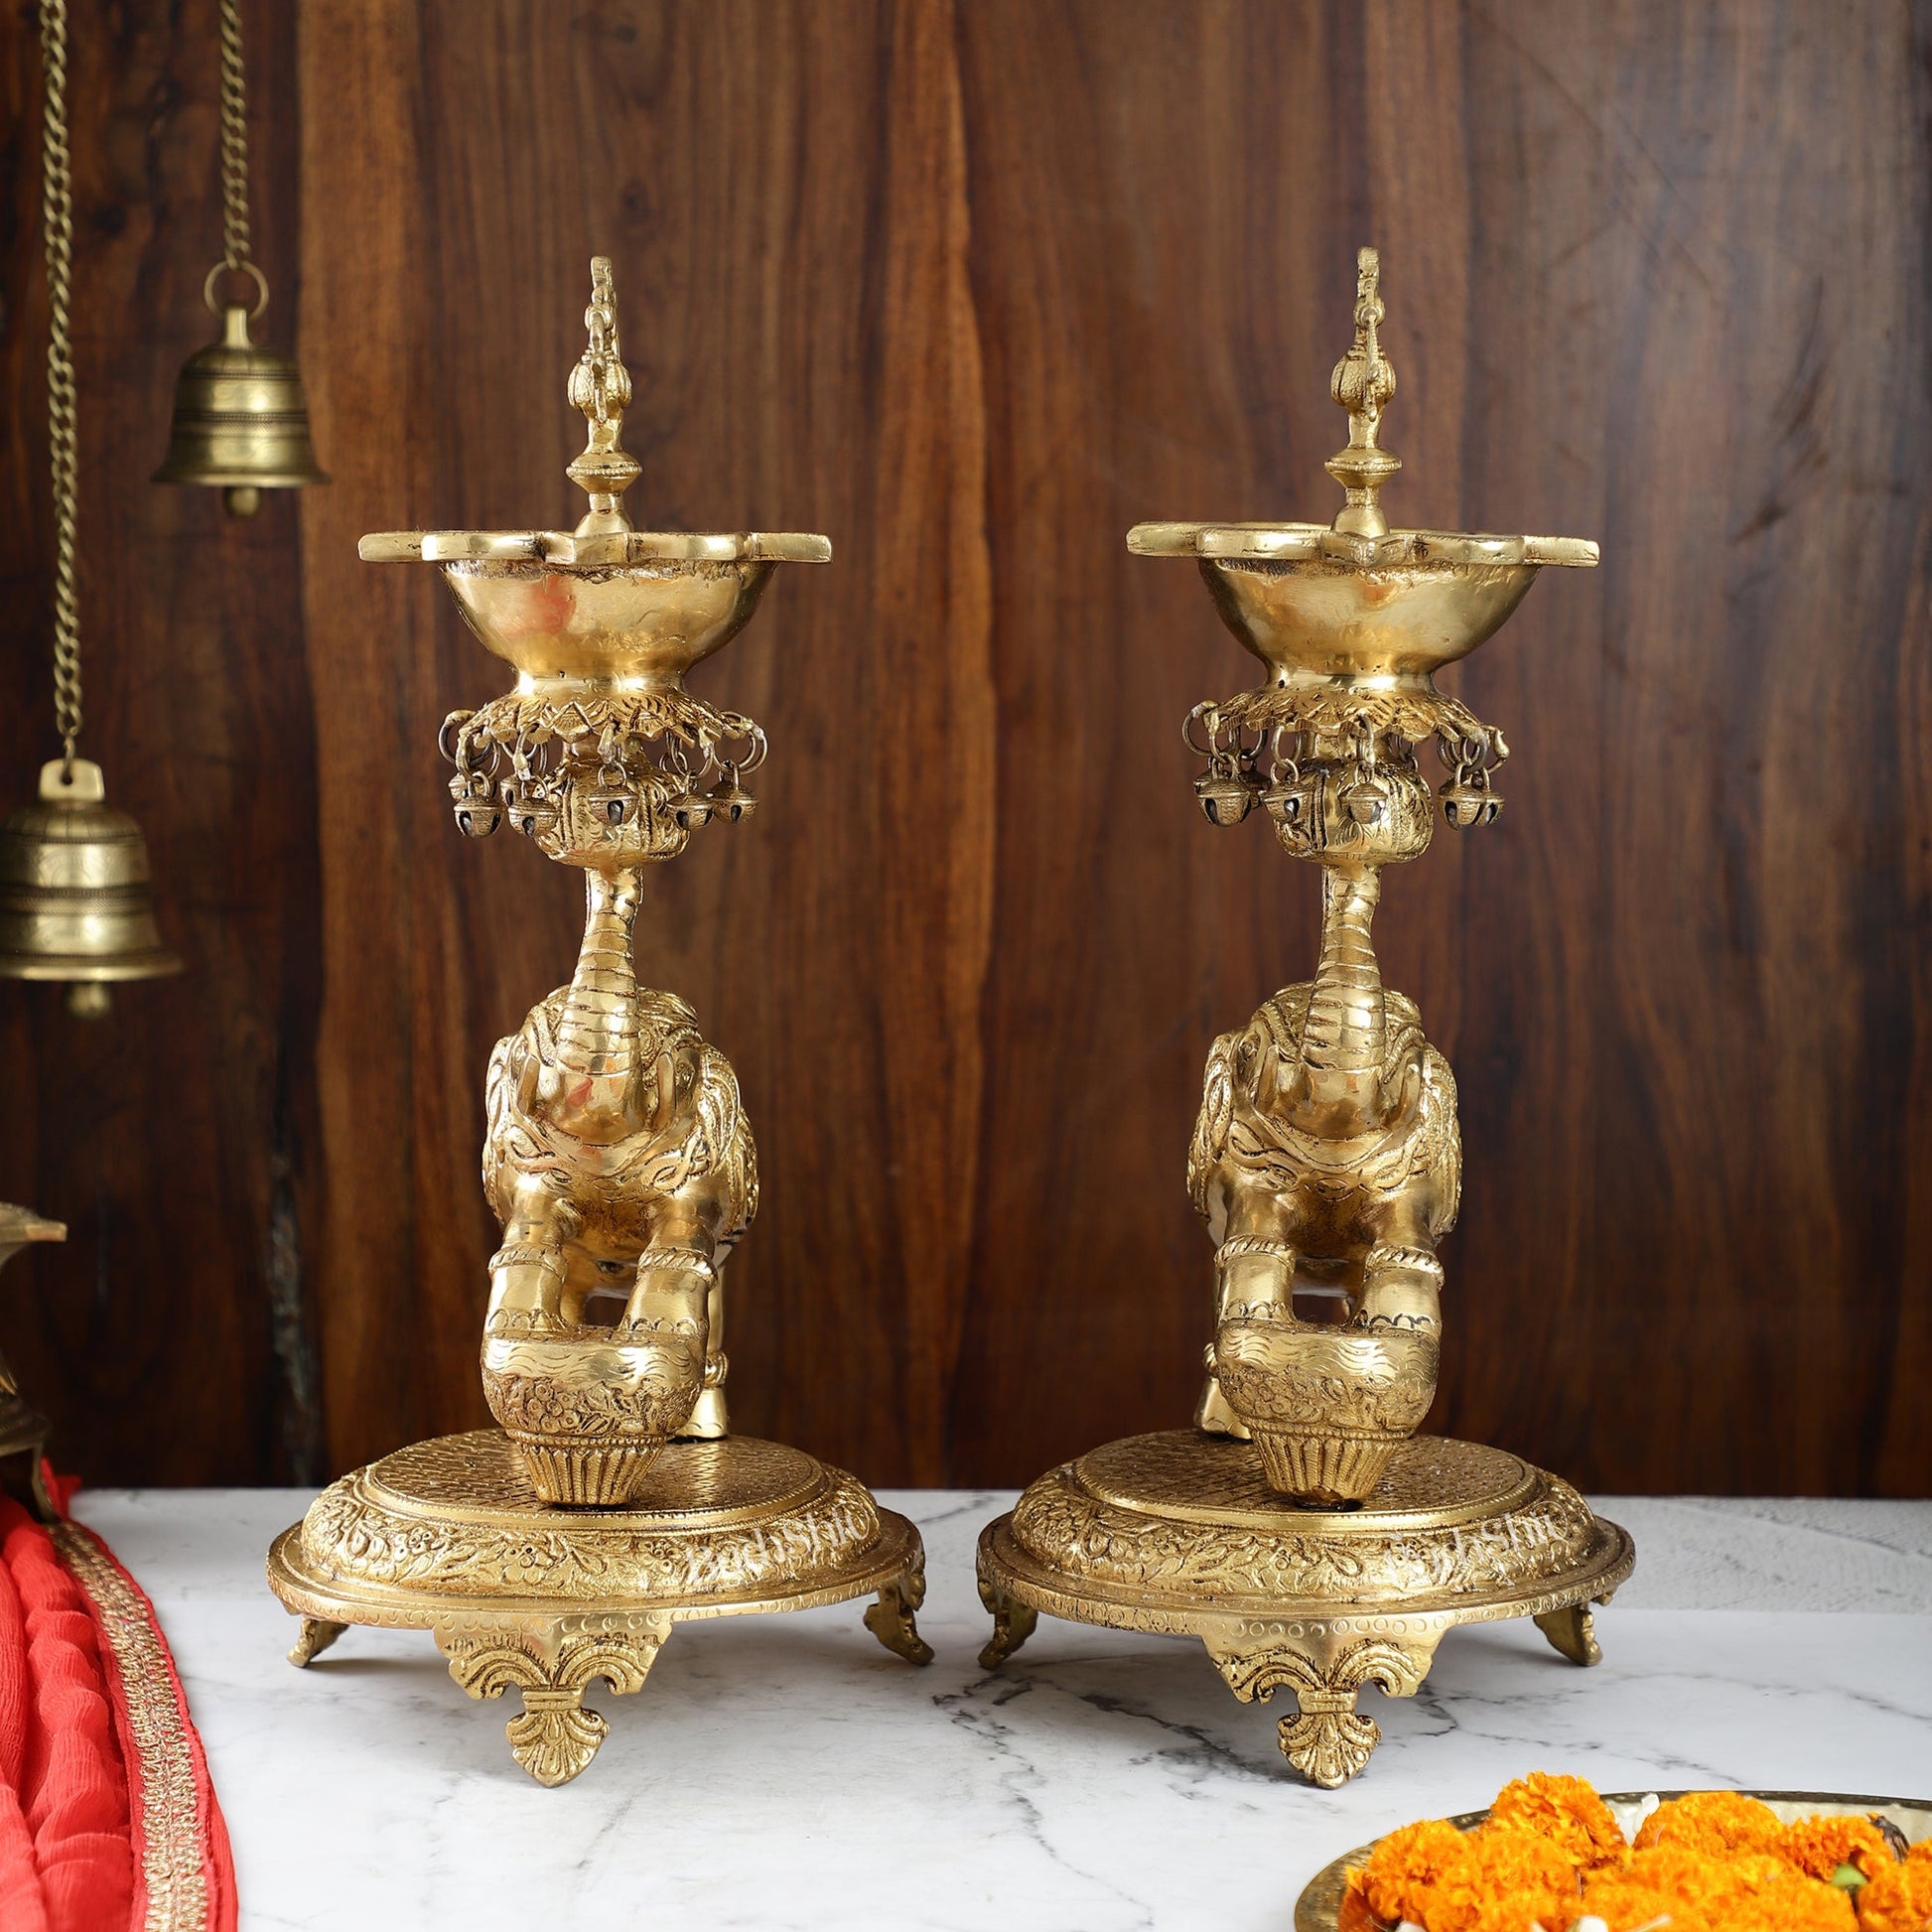 Exquisite Brass Peacock and Dancing Elephant Lamp Pair | 18" Height | Handcrafted Décor - Budhshiv.com